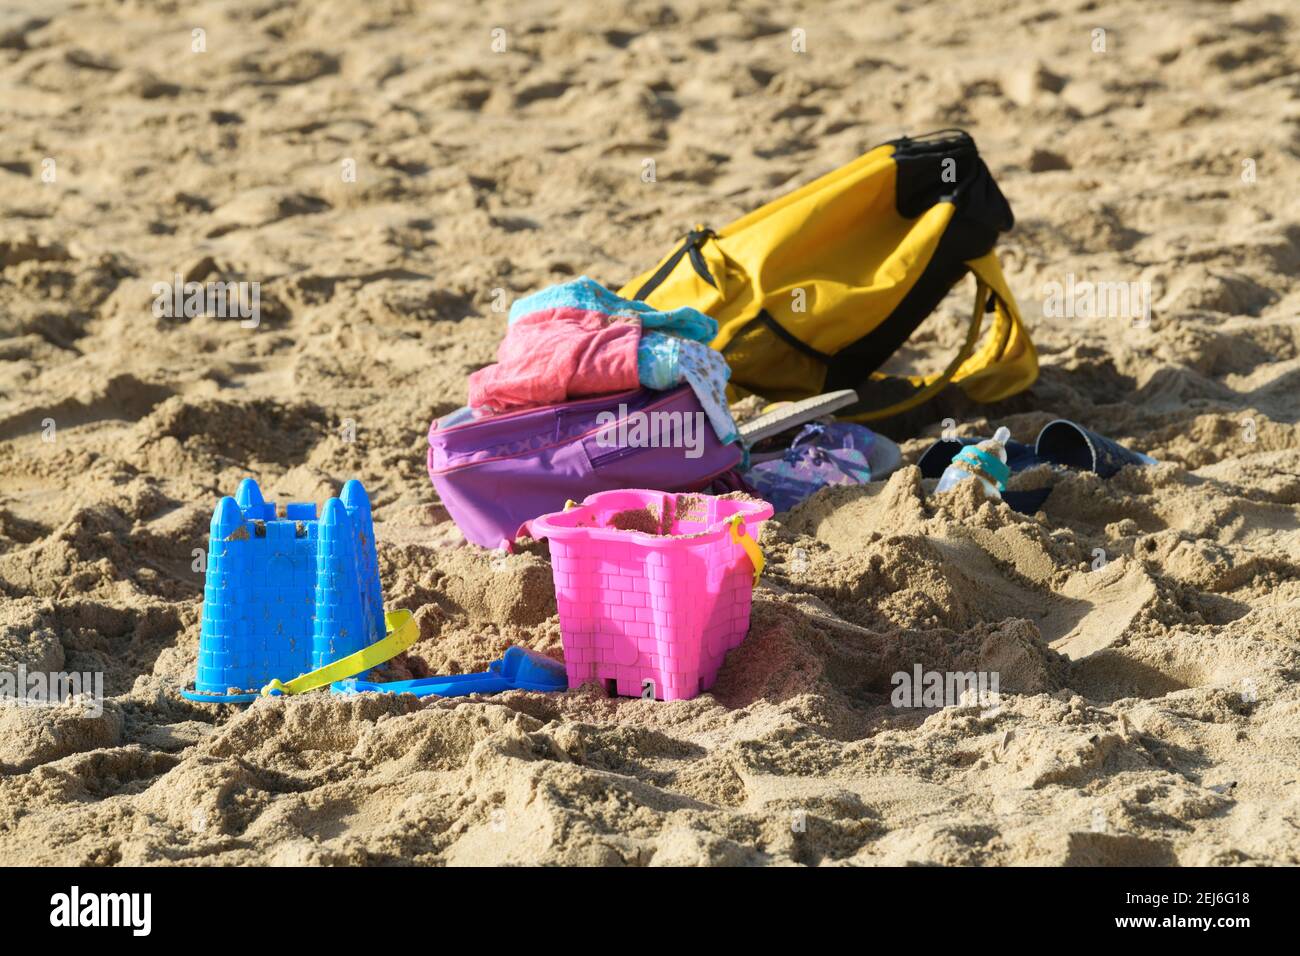 Toys, objects, beach play, seaside holiday, summer vacation, still life, Durban, South Africa, accessories, leisure things, collection of things Stock Photo